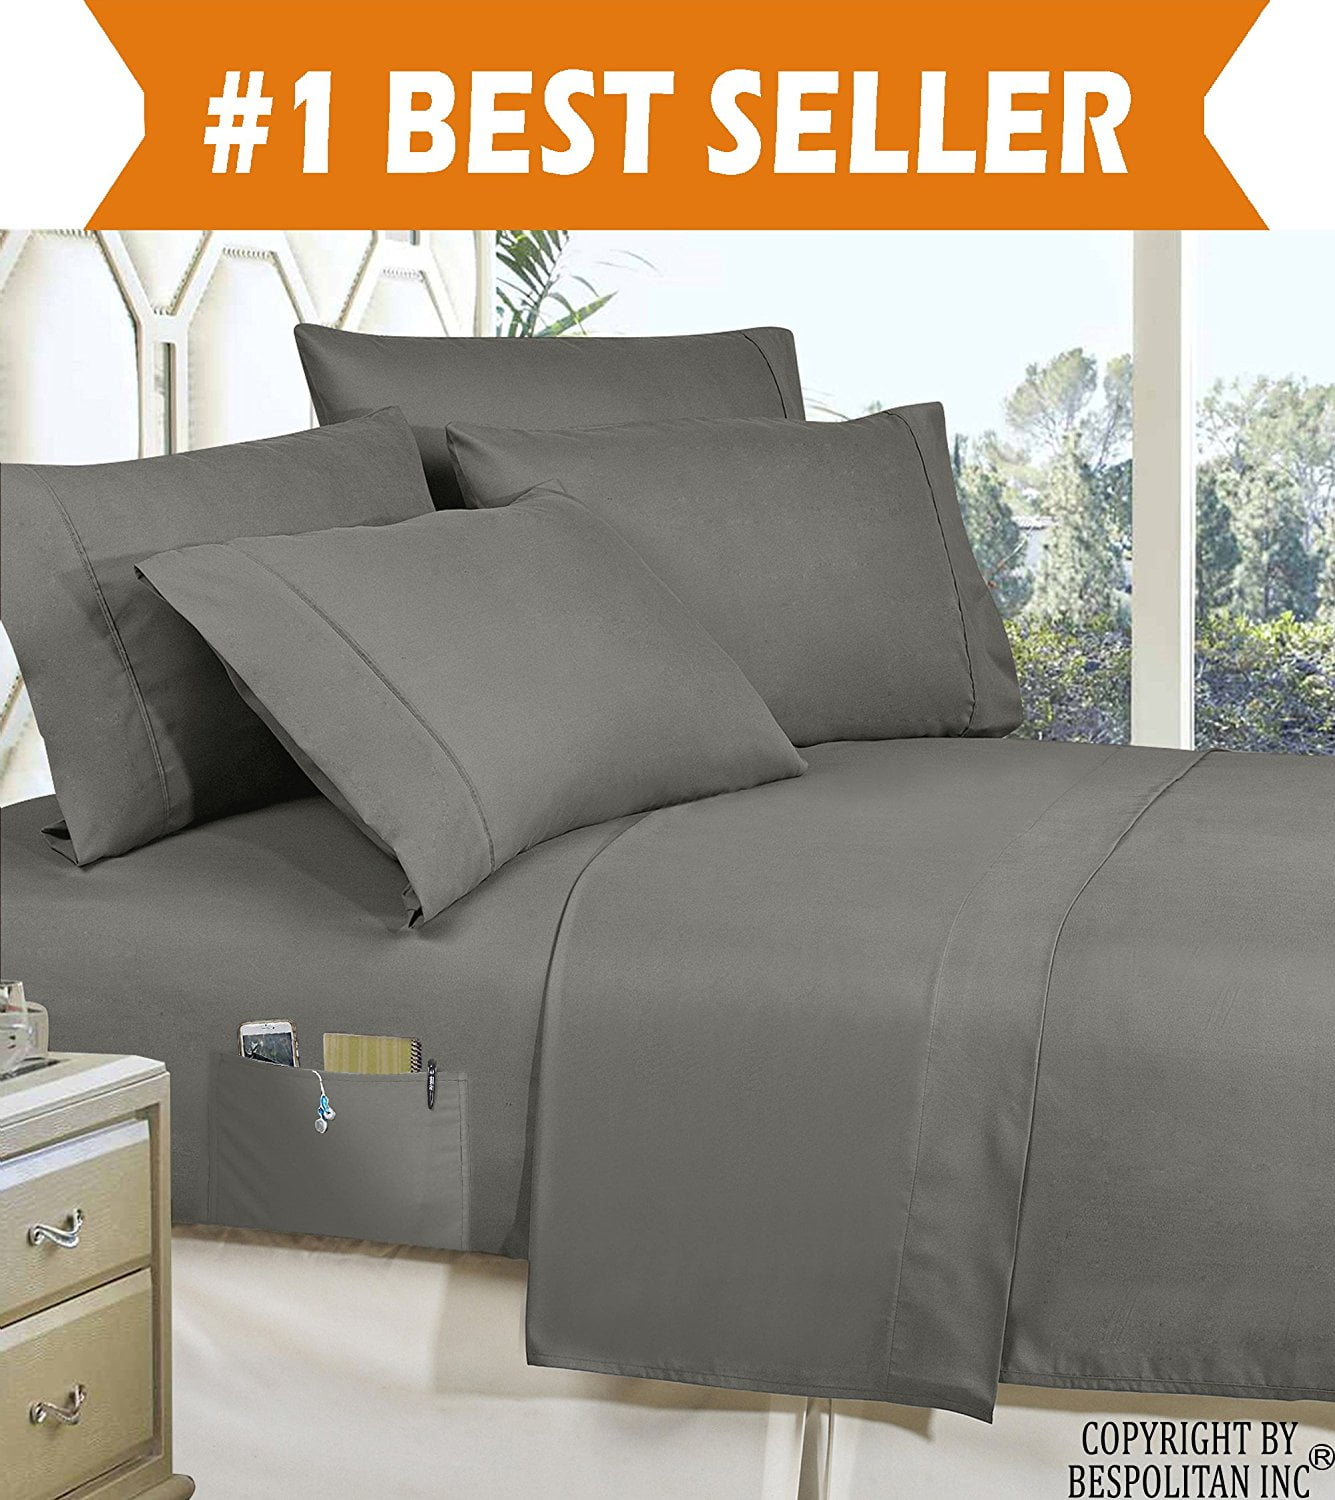 Details about   Us double 1000 tc soft egyptian cotton 5 pc comforter set show original title fitted sheet all 